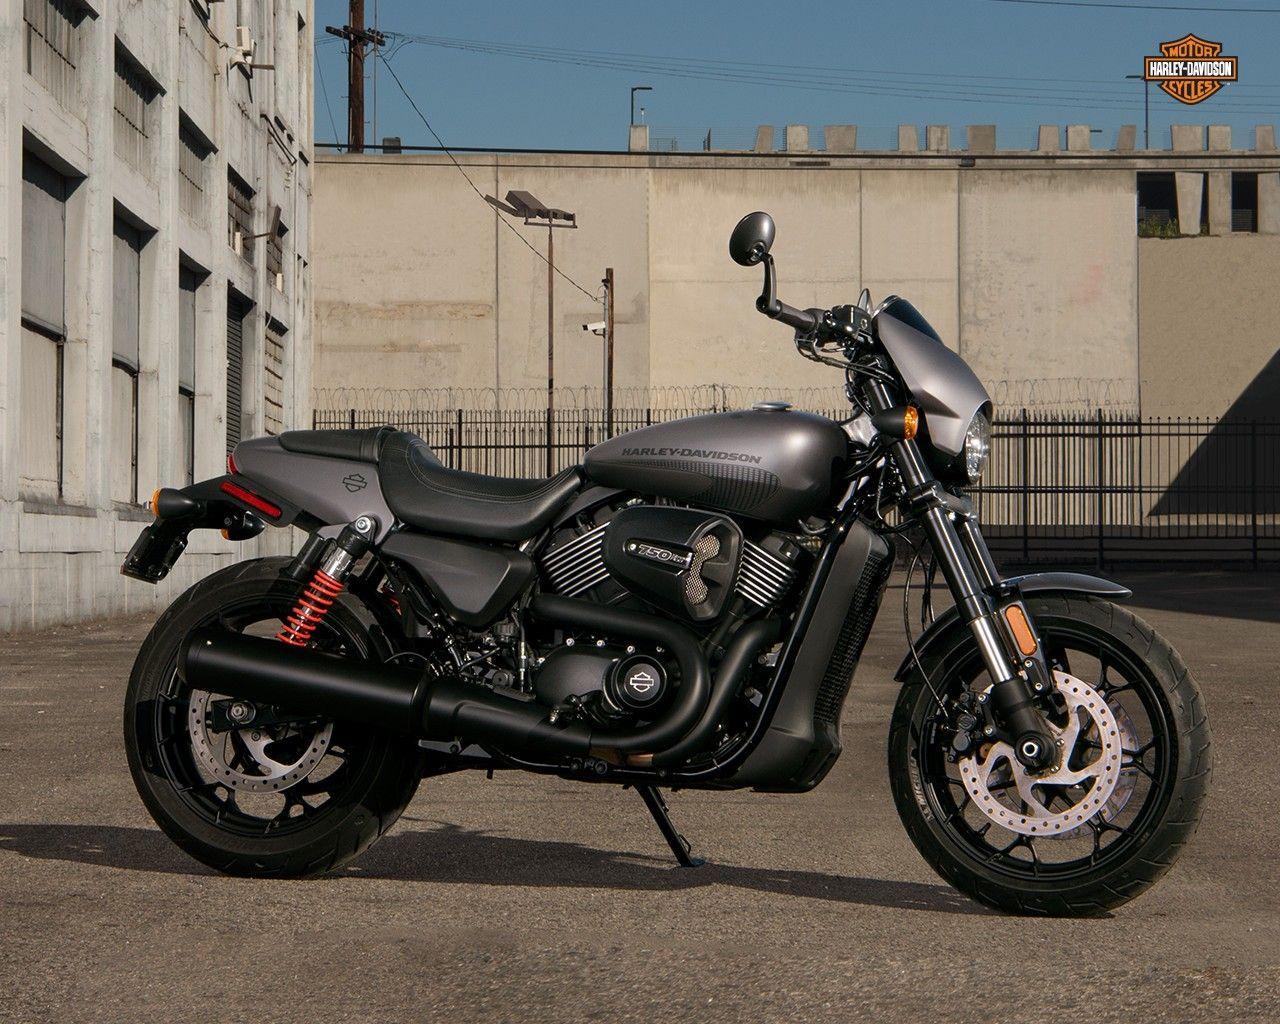 Harley Street Rod 750 India Price 5.86 lakhs, Specifications